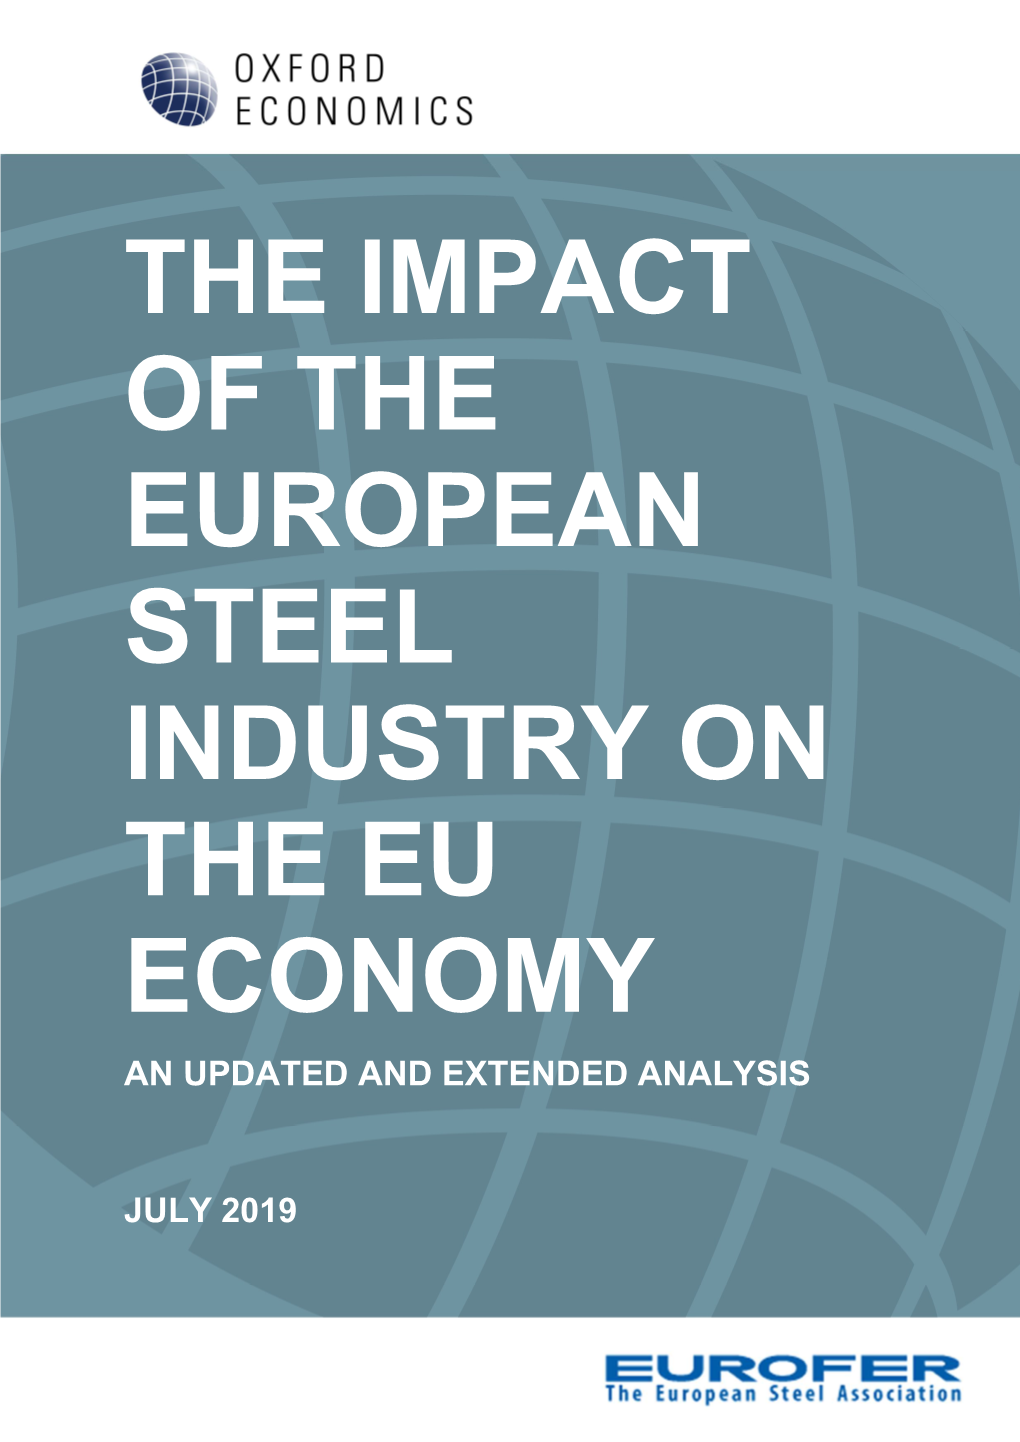 The Impact of the European Steel Industry on the EU Economy